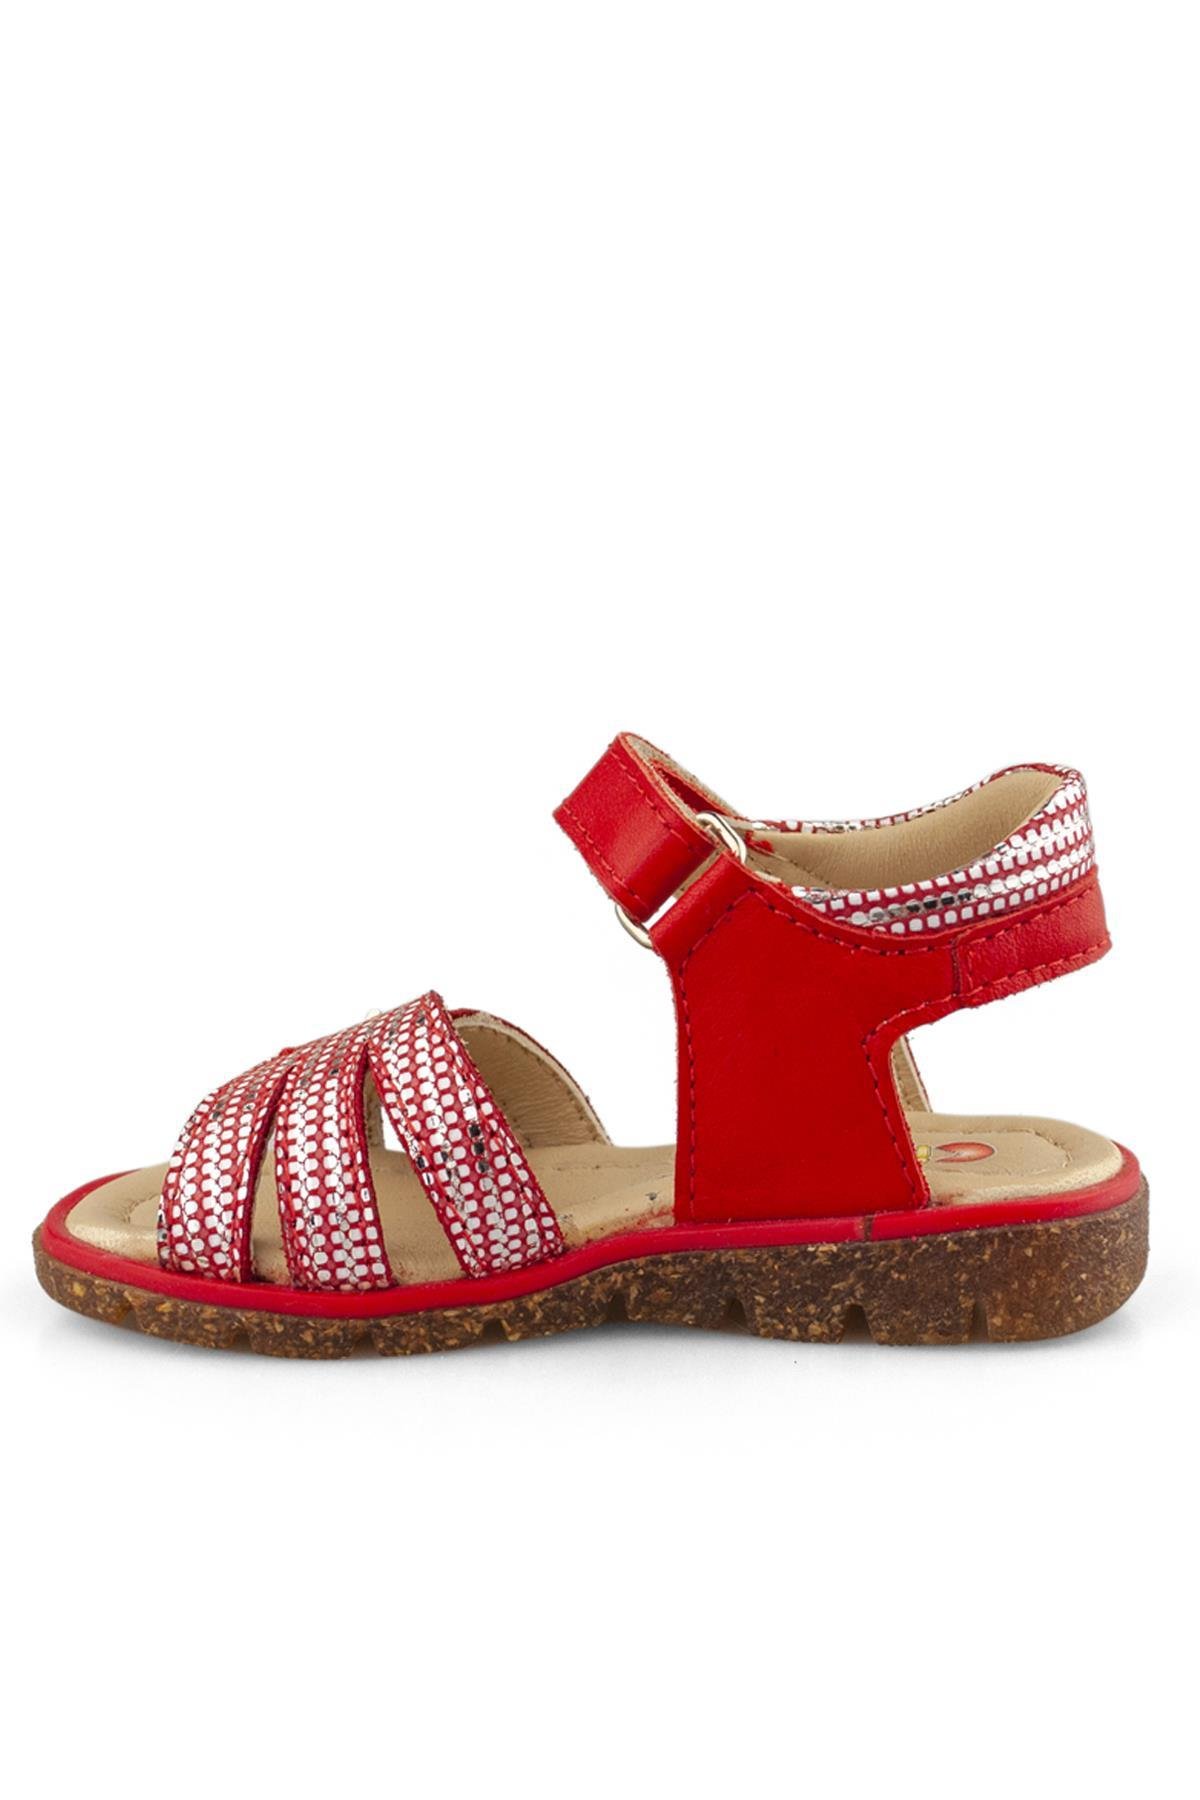 Genuine Leather Red Girls Sandals